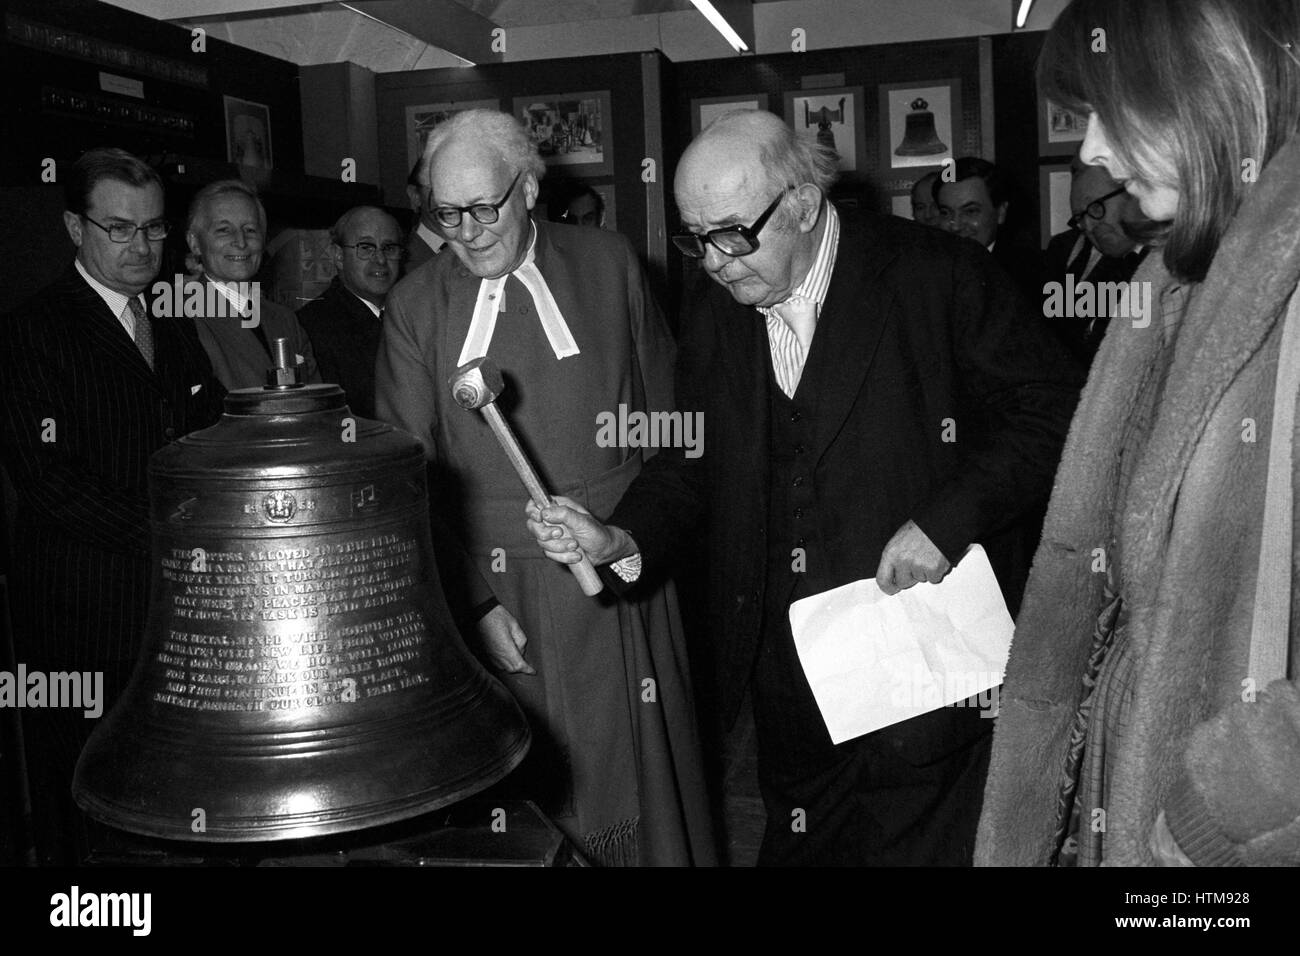 The Poet Laureate Sir John Betjeman striking a mounted bell in the Norman Undercroft at Westminster Abbey to officially open the second of the present series of 'miniature' exhibitions being held there. Stock Photo